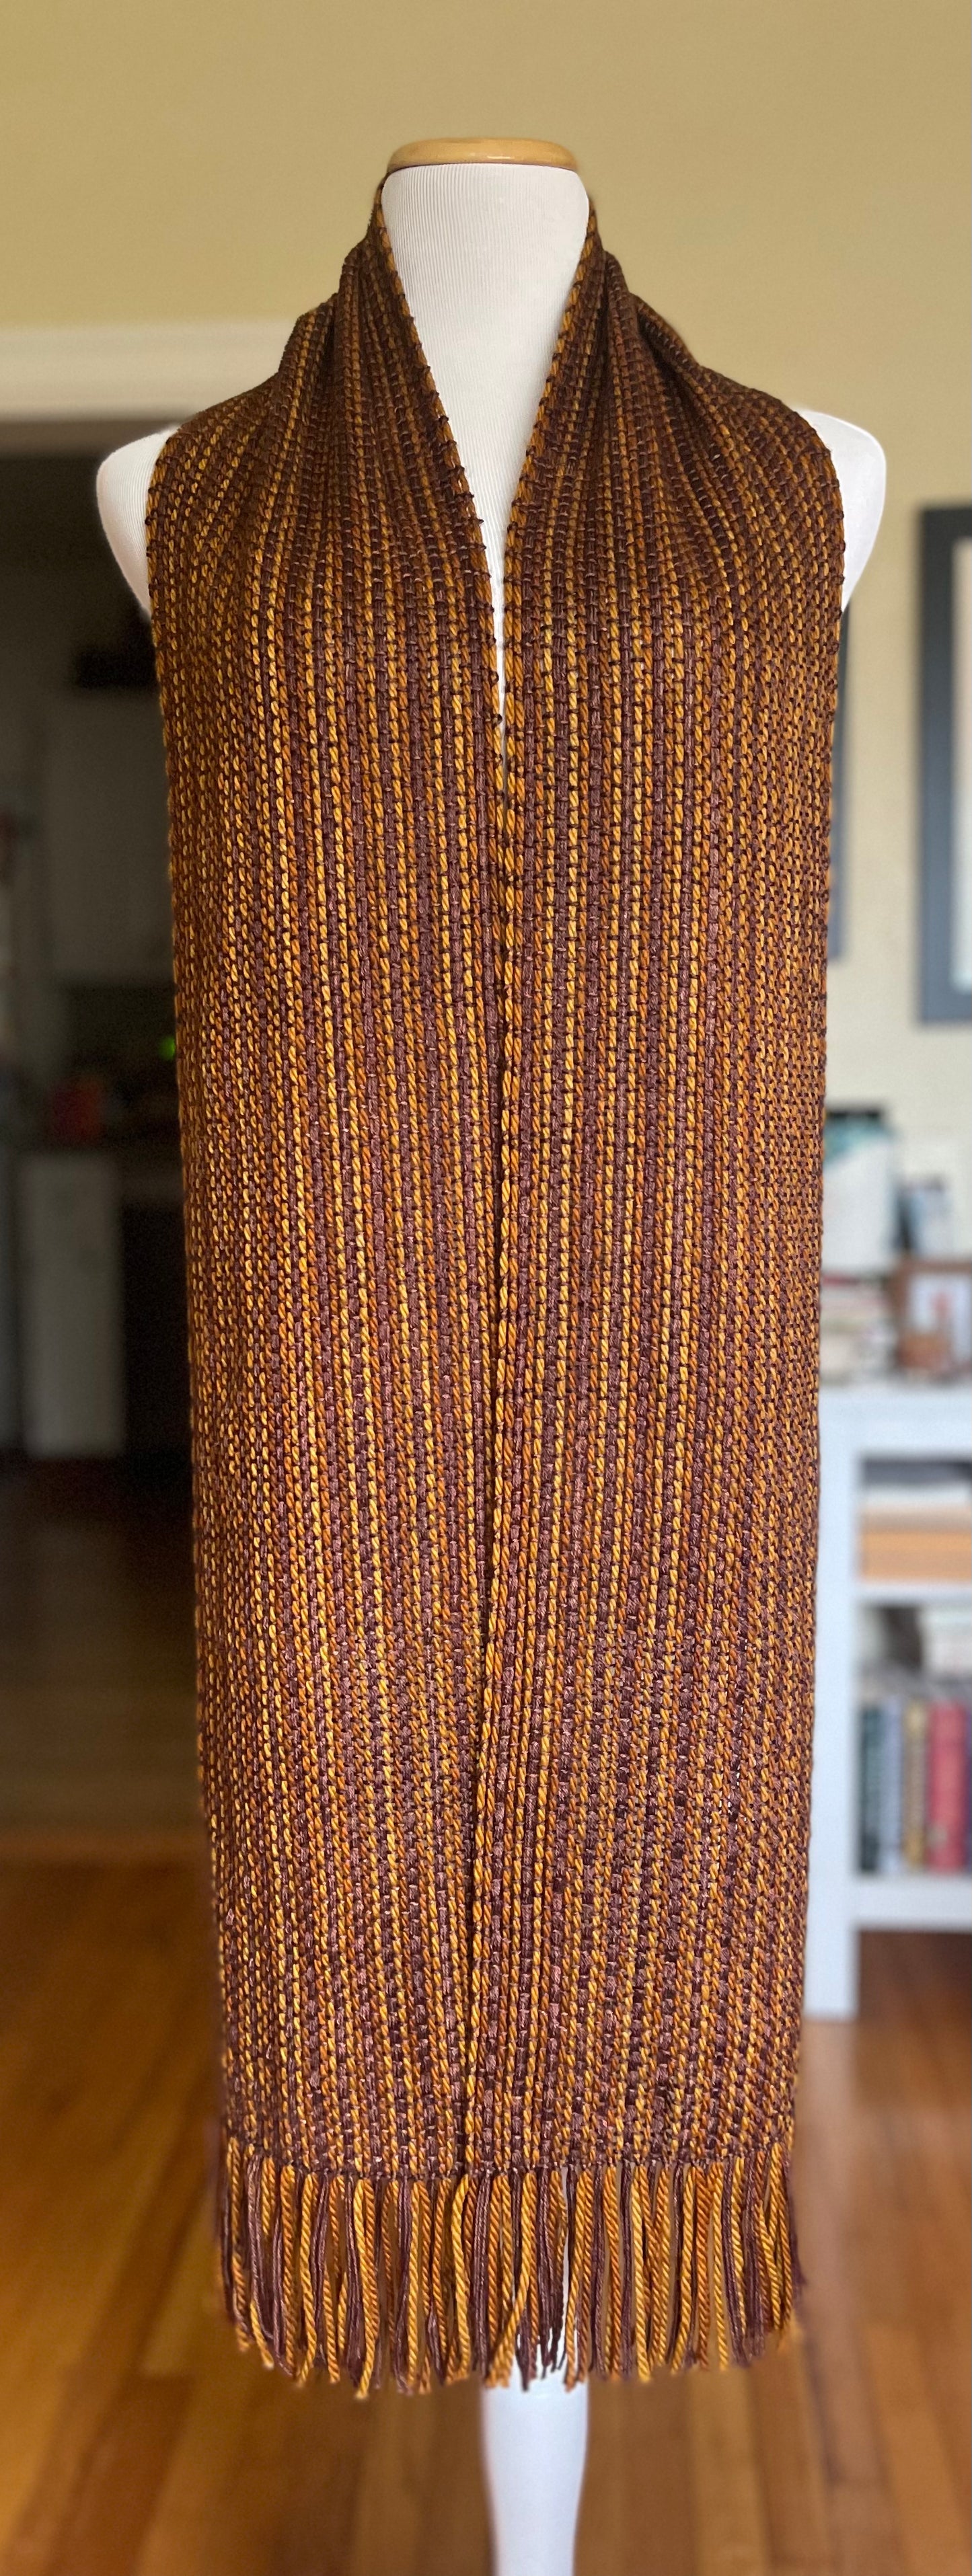 Caramel, Gingerbread and Bronze Handwoven Scarf by The Village Weaver